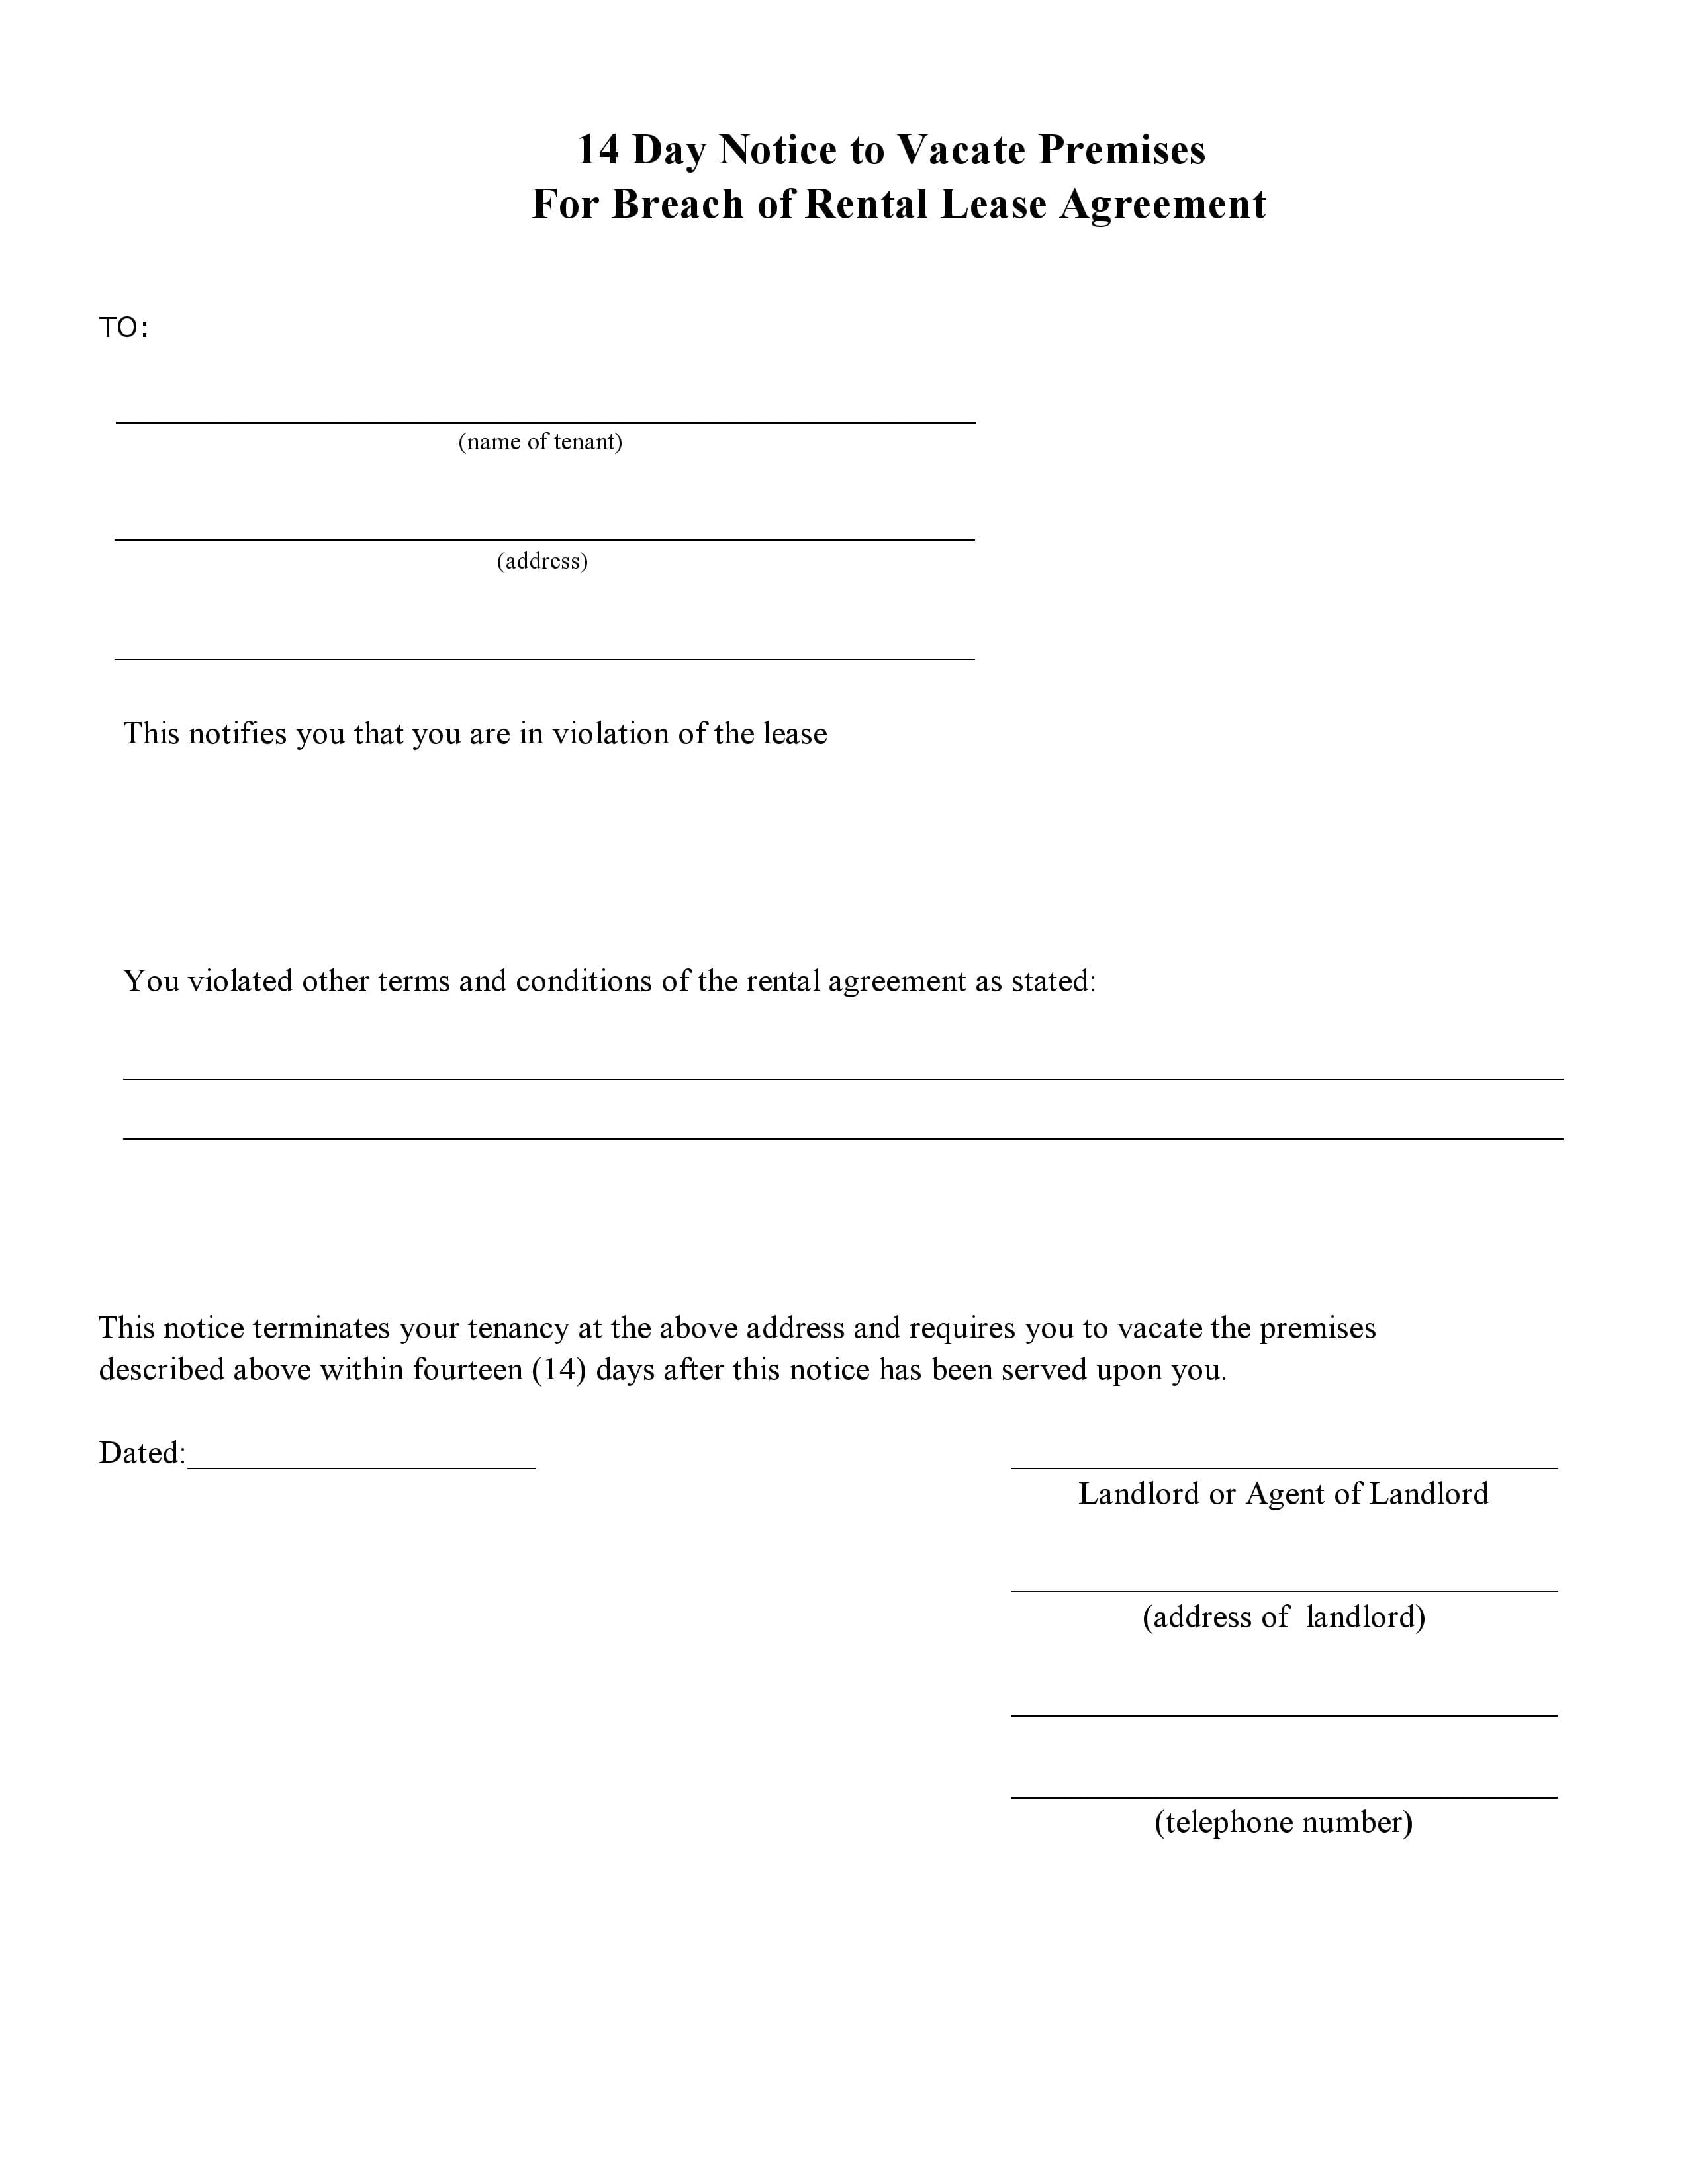 free blank 14 day eviction notice form for breach of